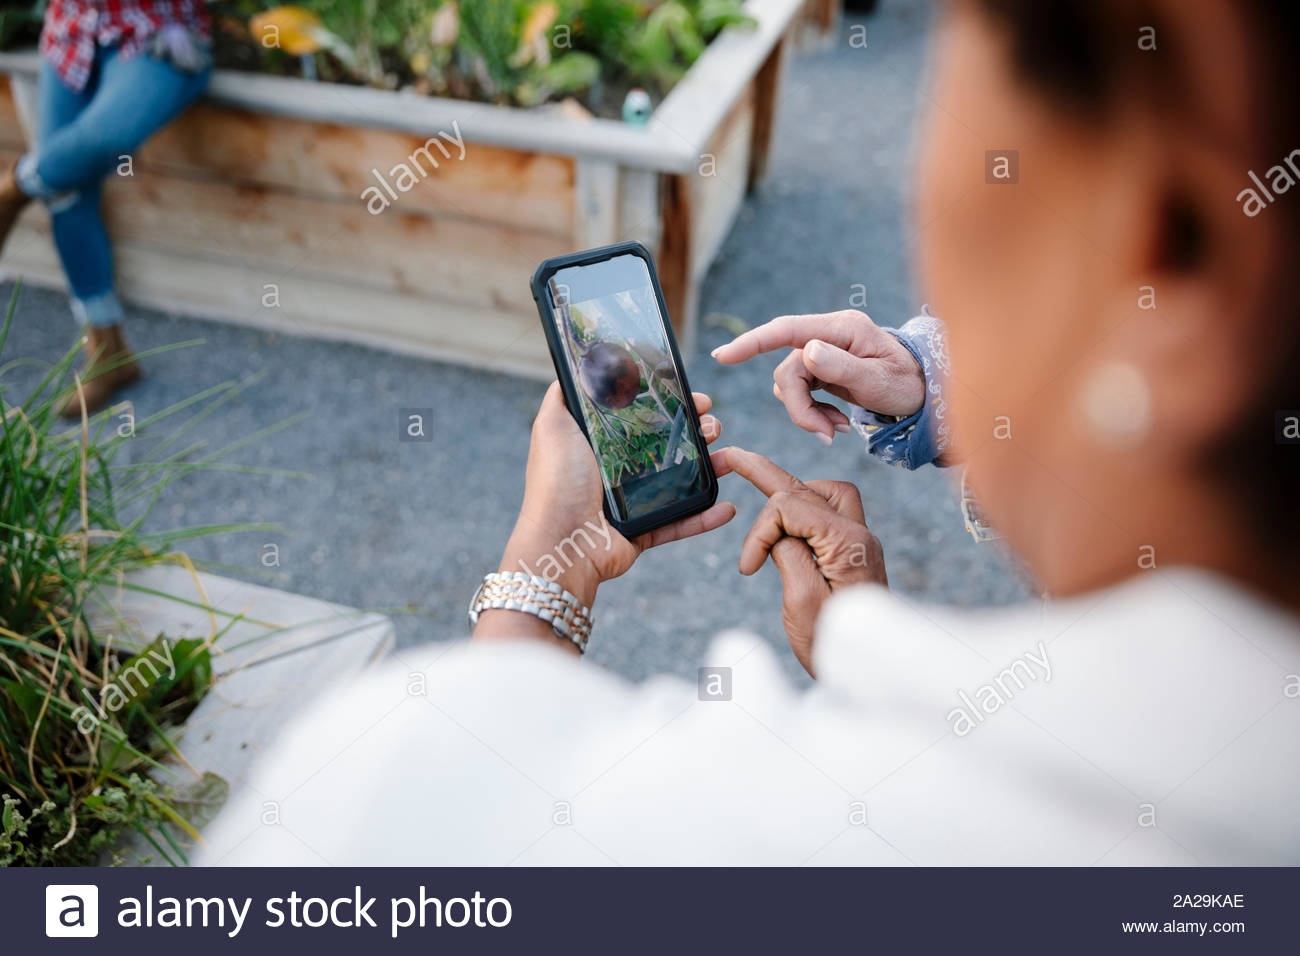 Woman with camera phone in garden Stock Photo